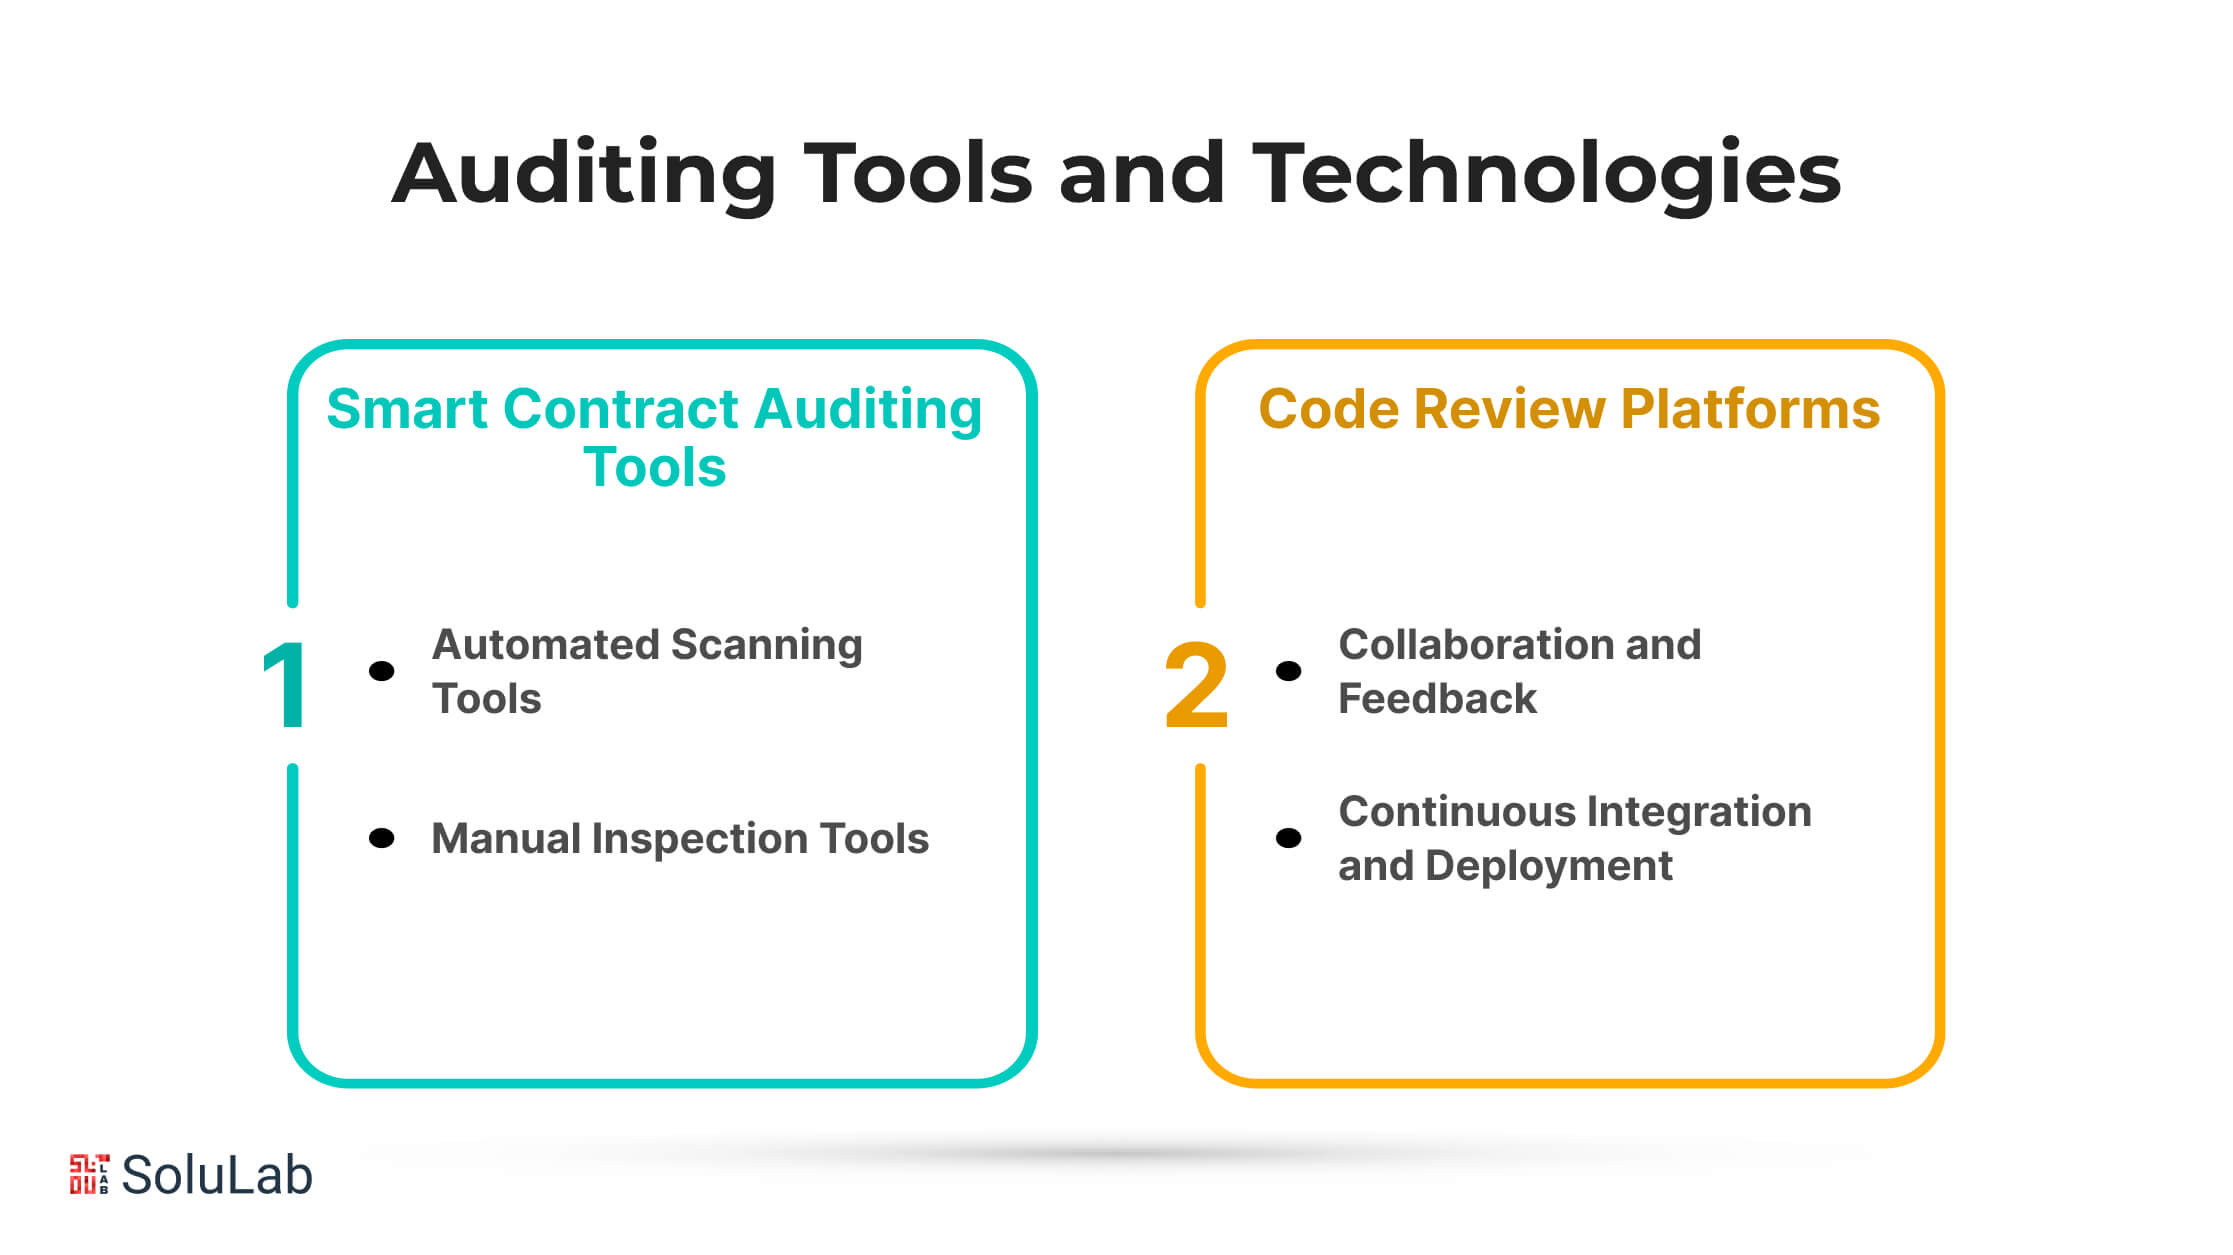 Auditing Tools and Technologies